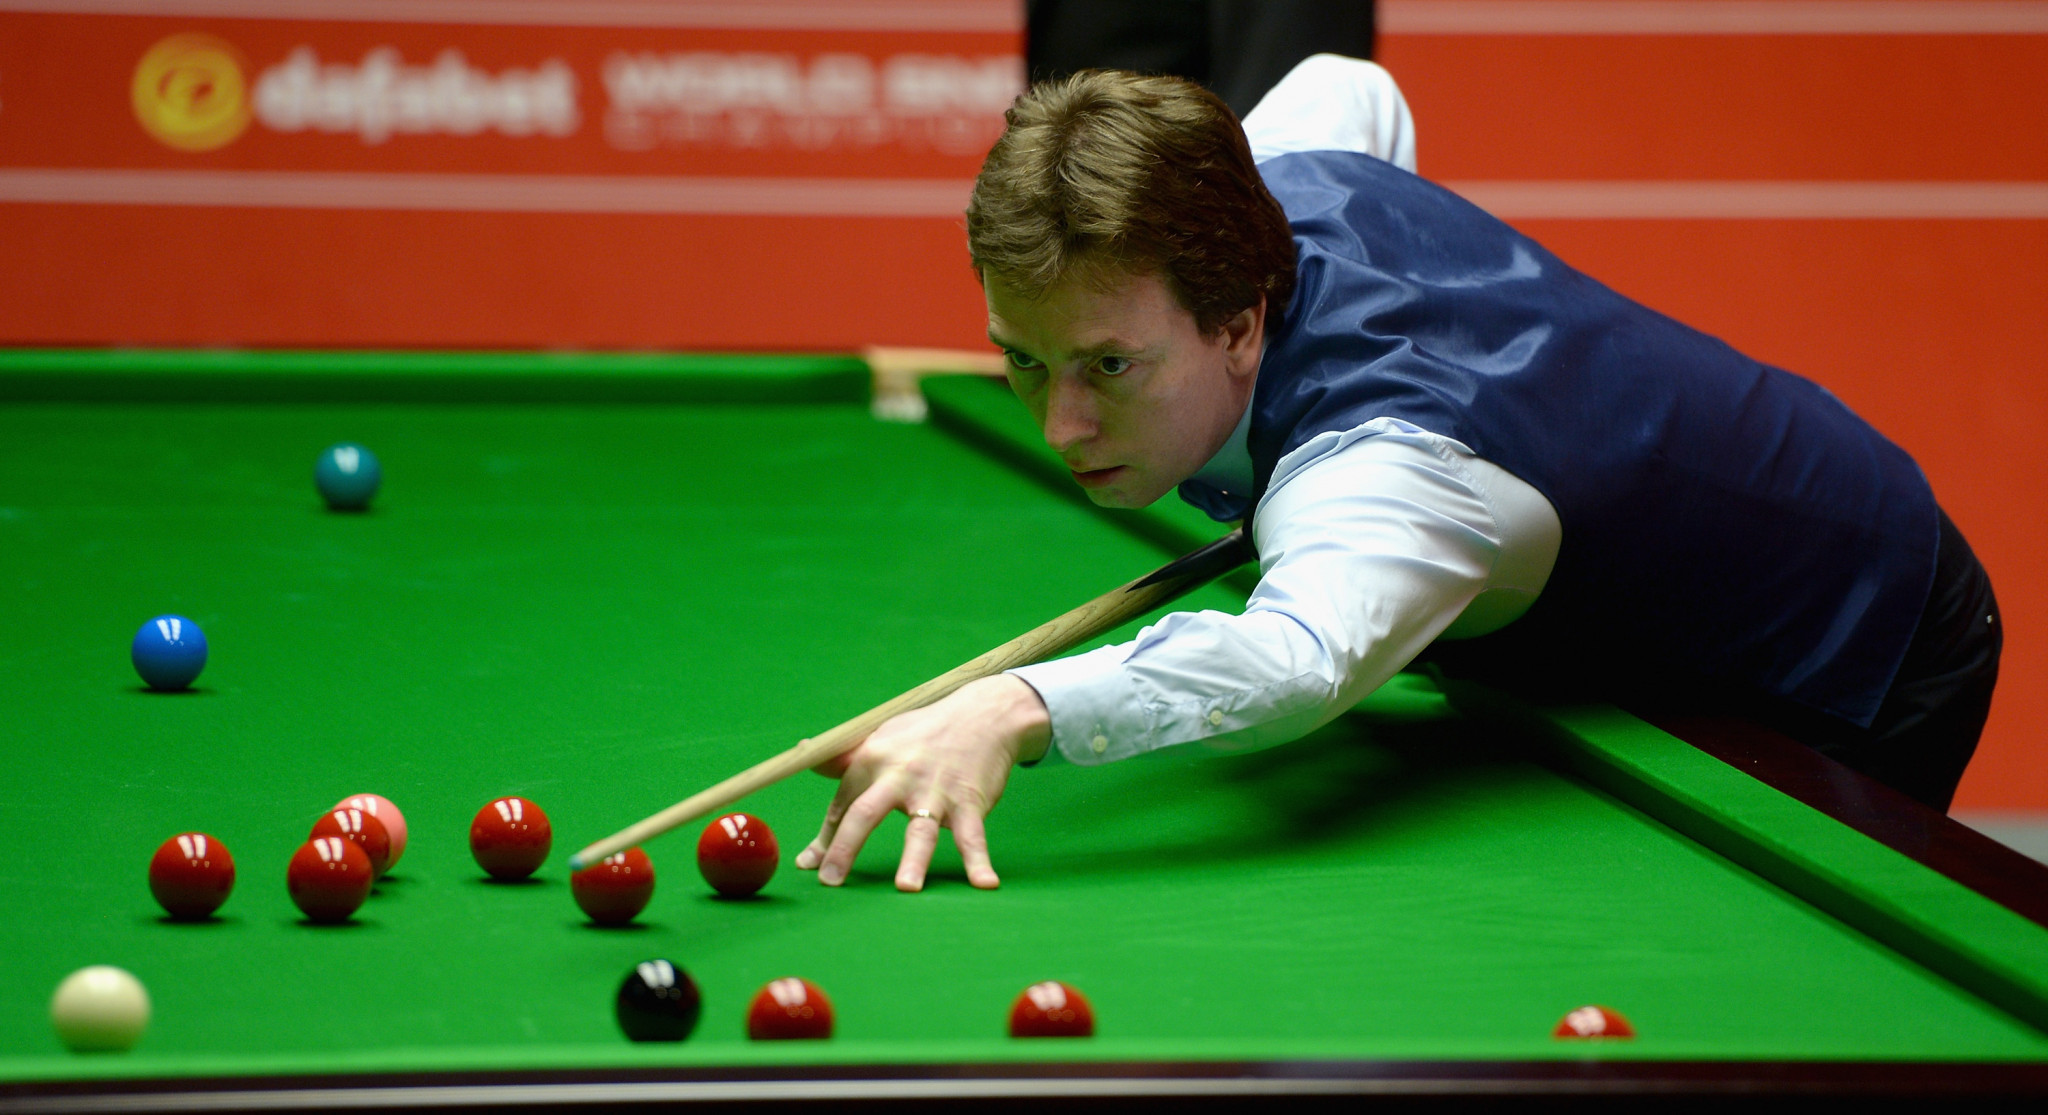 Ireland's Ken Doherty as been re-elected to the WPBSA board of directors as a player director, a role he has held since 2012, the world governing body's Annual General Meeting in Glasgow ©Getty Images